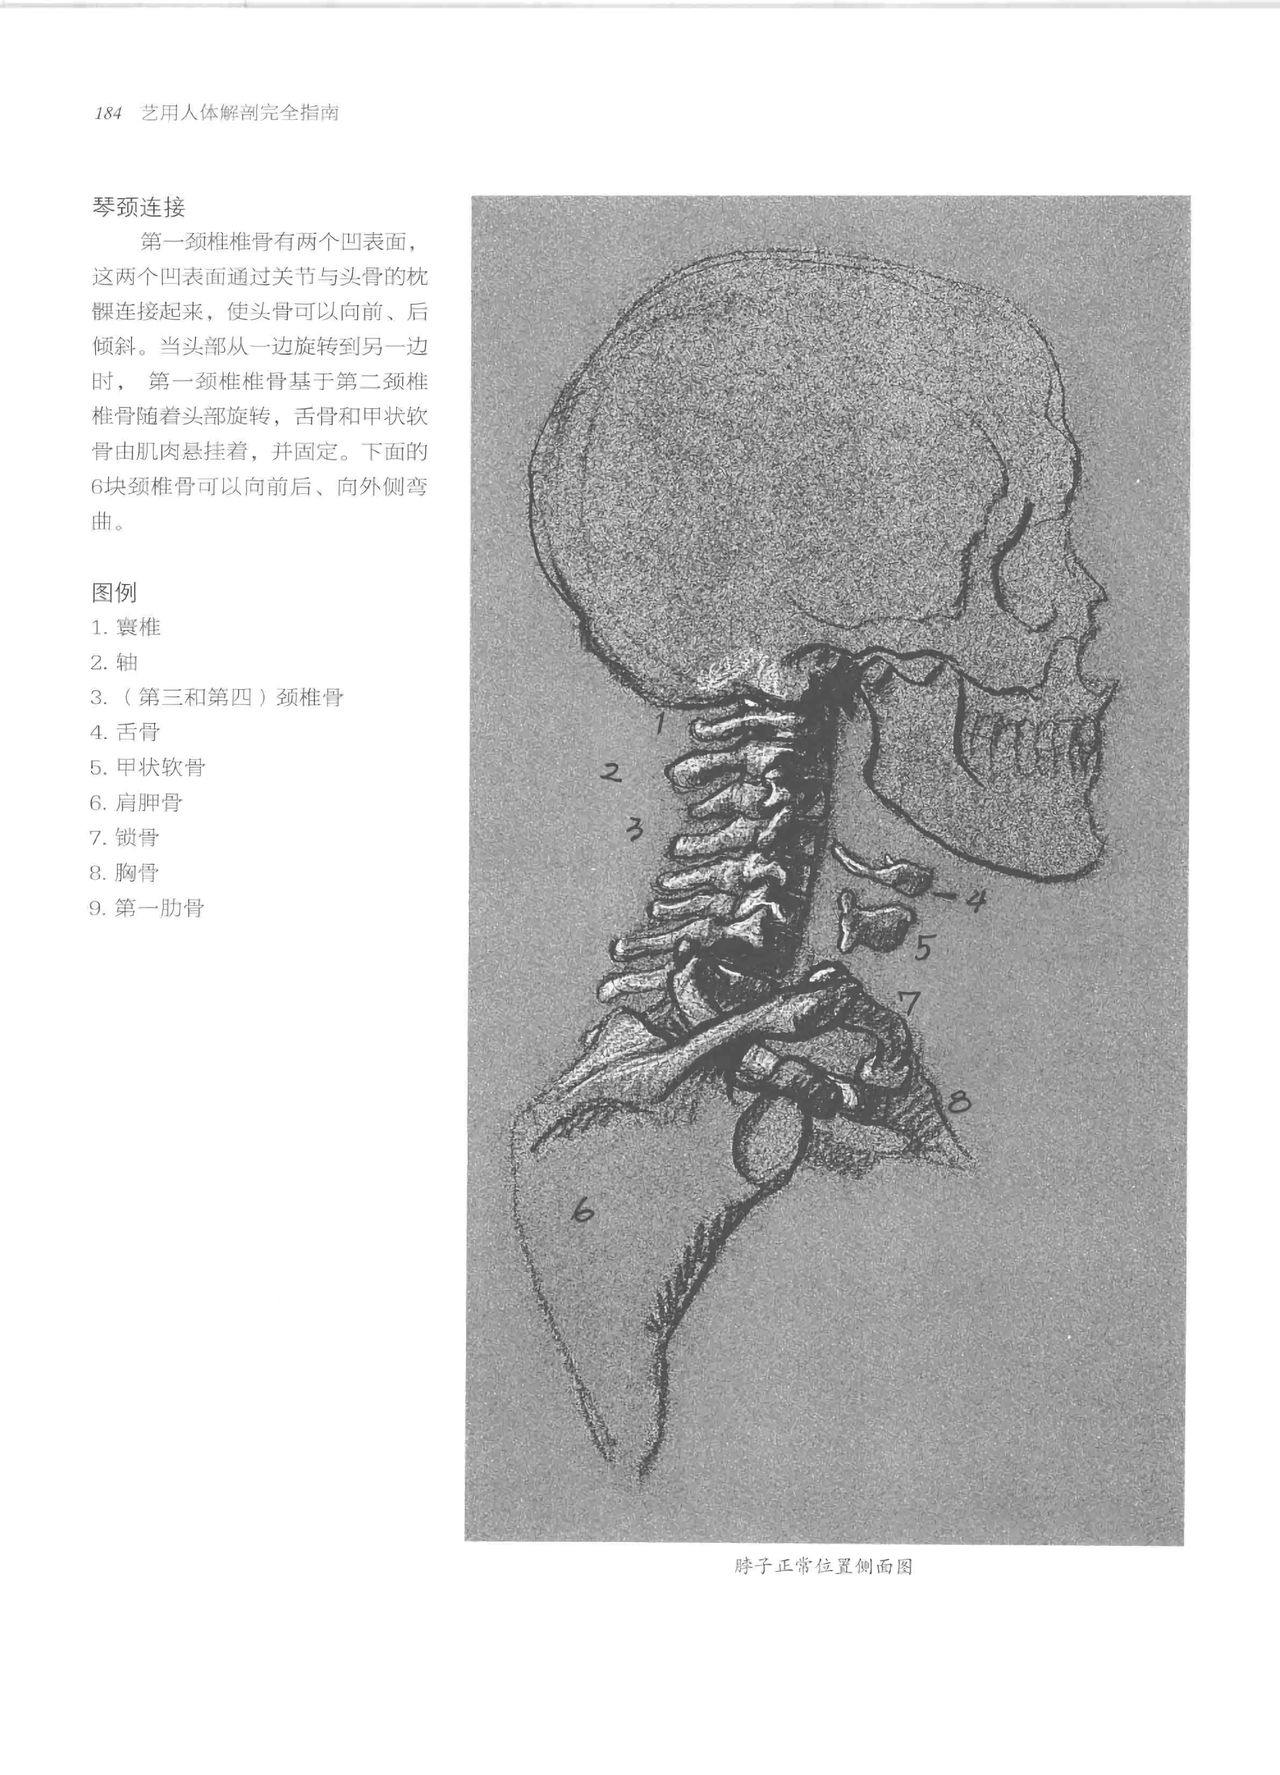 Anatomy-A Complete Guide for Artists - Joseph Sheppard [Chinese] 184